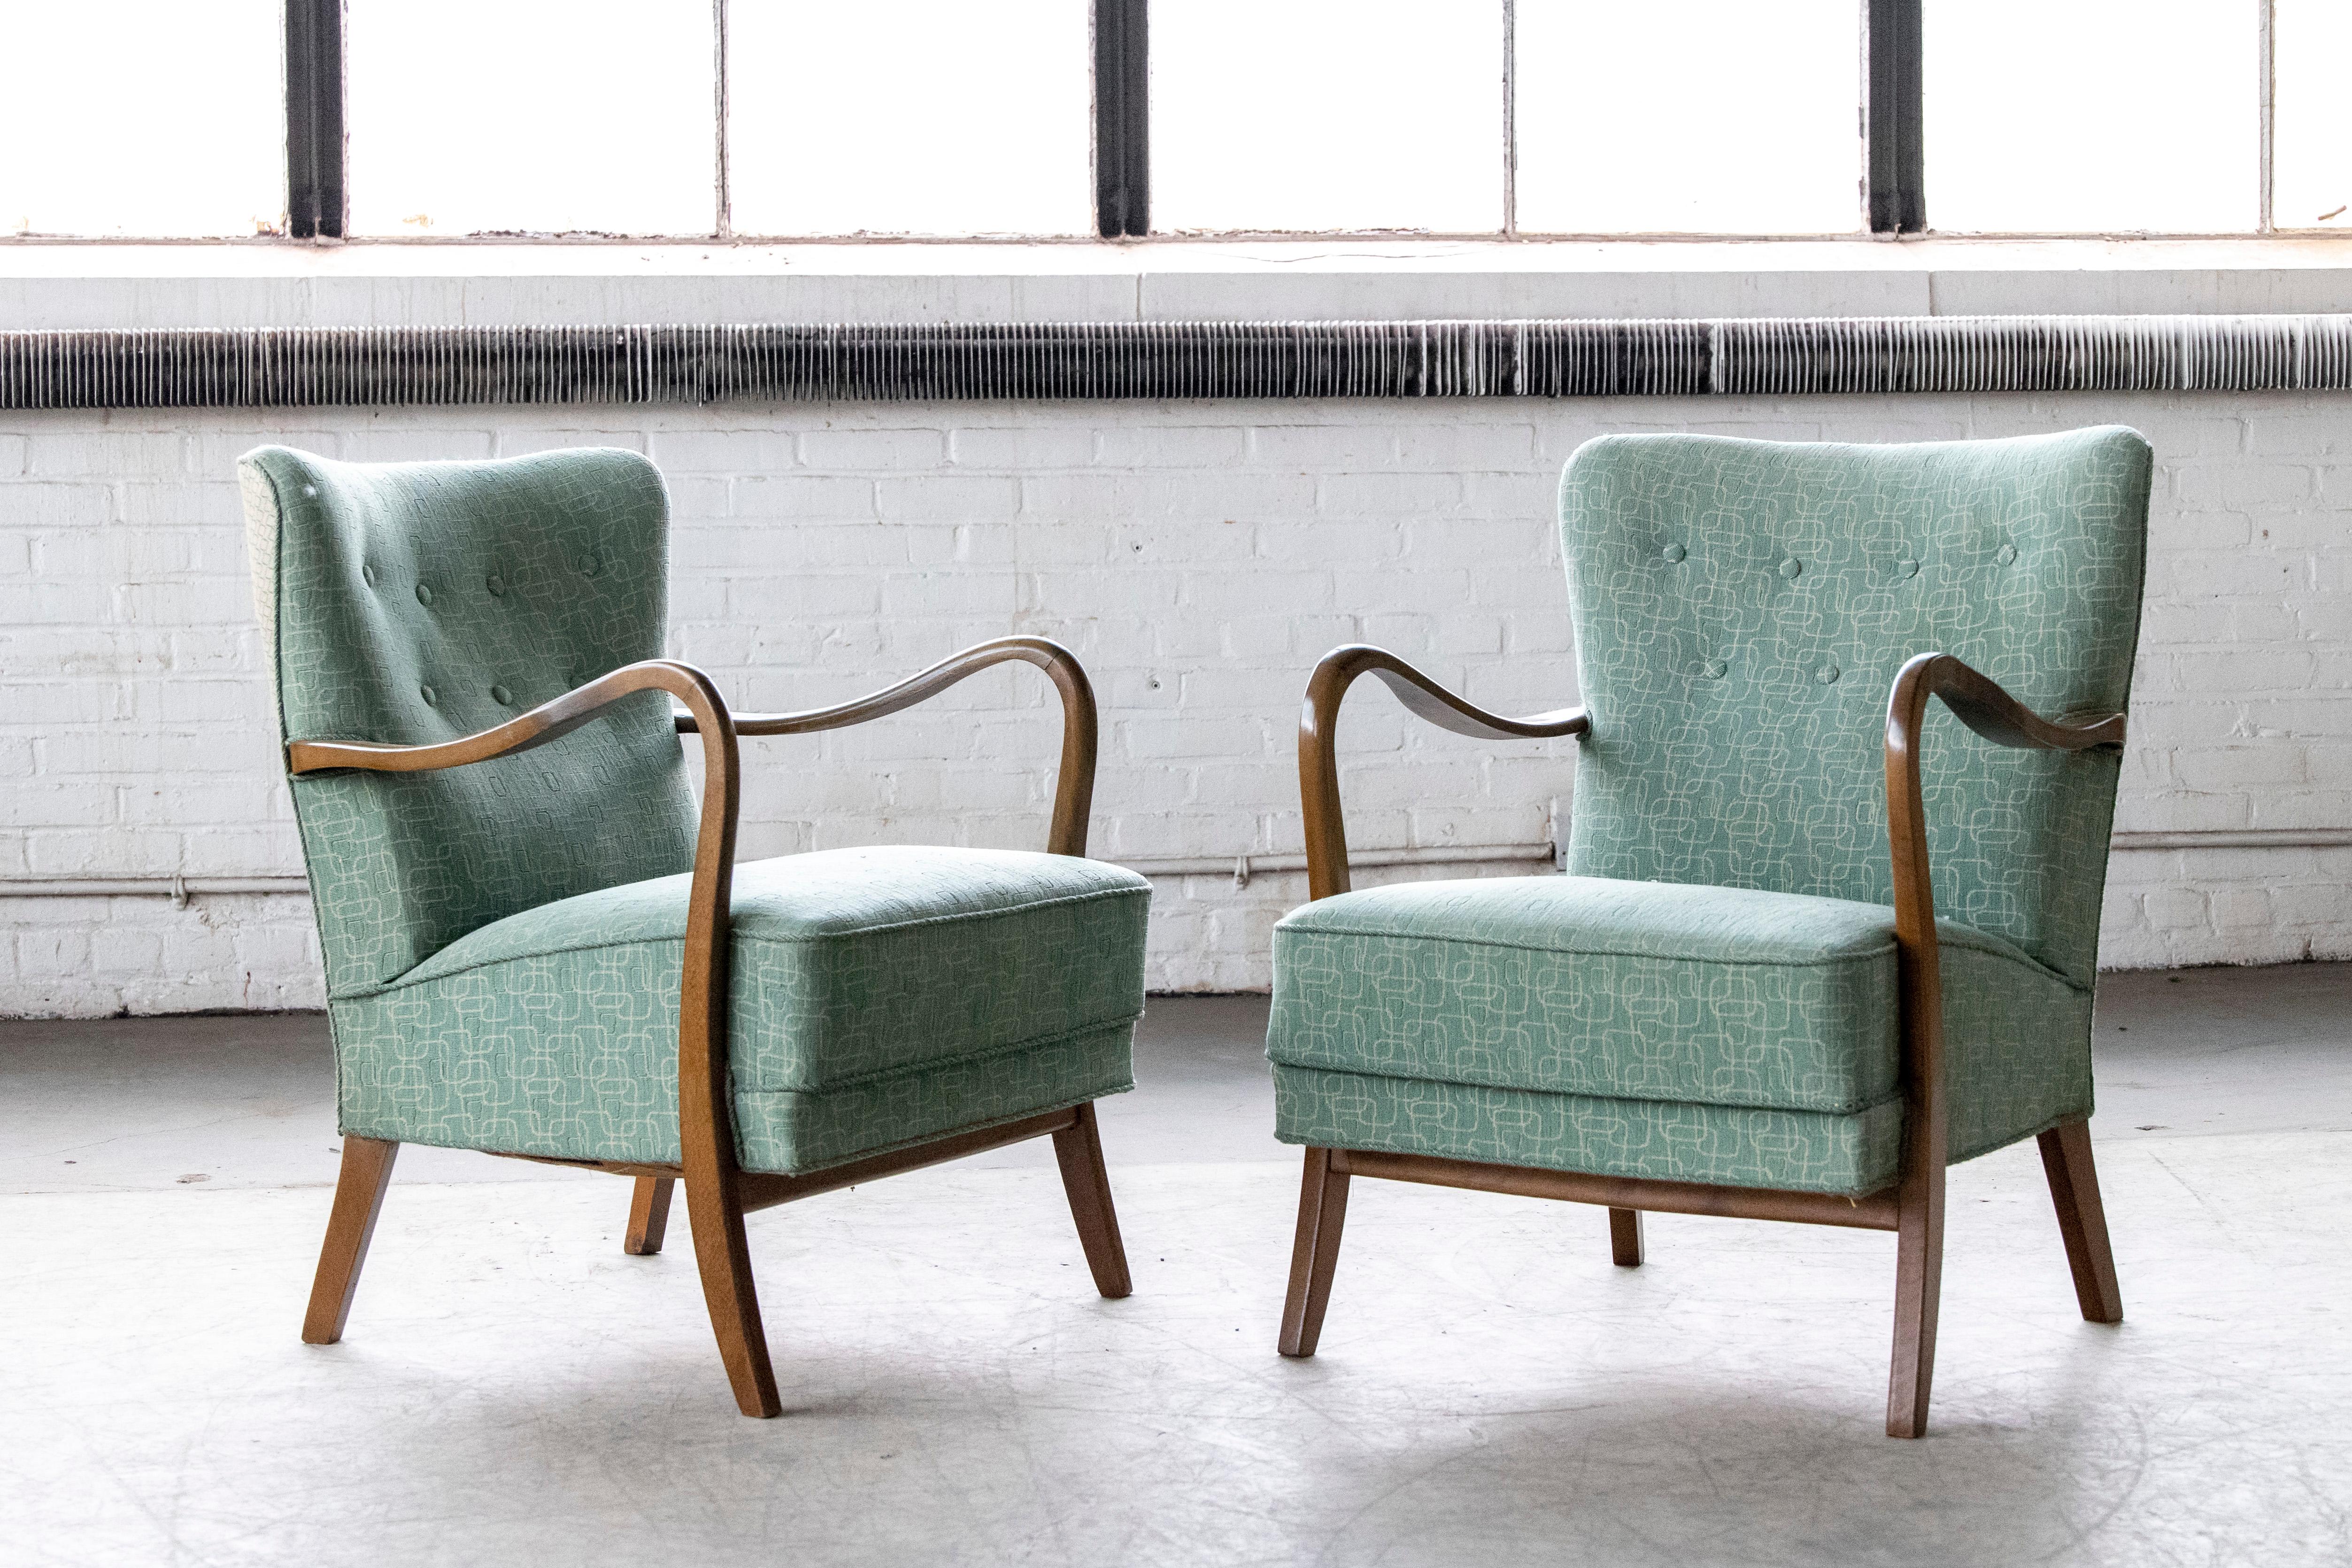 Classic pair of elegant Danish low back armchairs from the 1940s by Alfred Christensen for Slagelse Mobelvaerk with open armrests in beautifully curved stained beech. We love how the armrests extend into the legs. Nice slim elegant silhouette. Solid